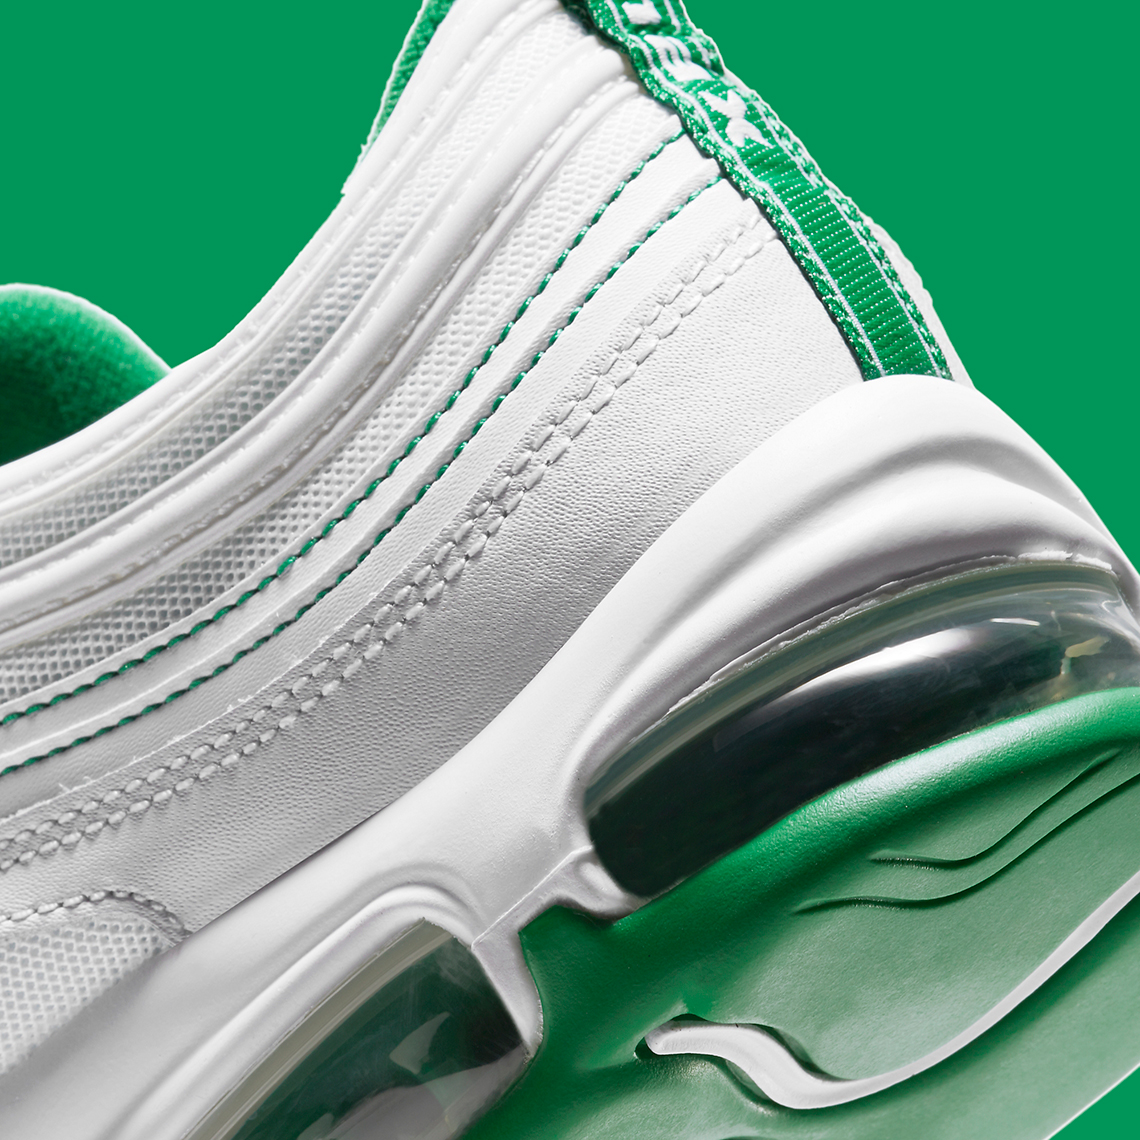 air max 97 white and green